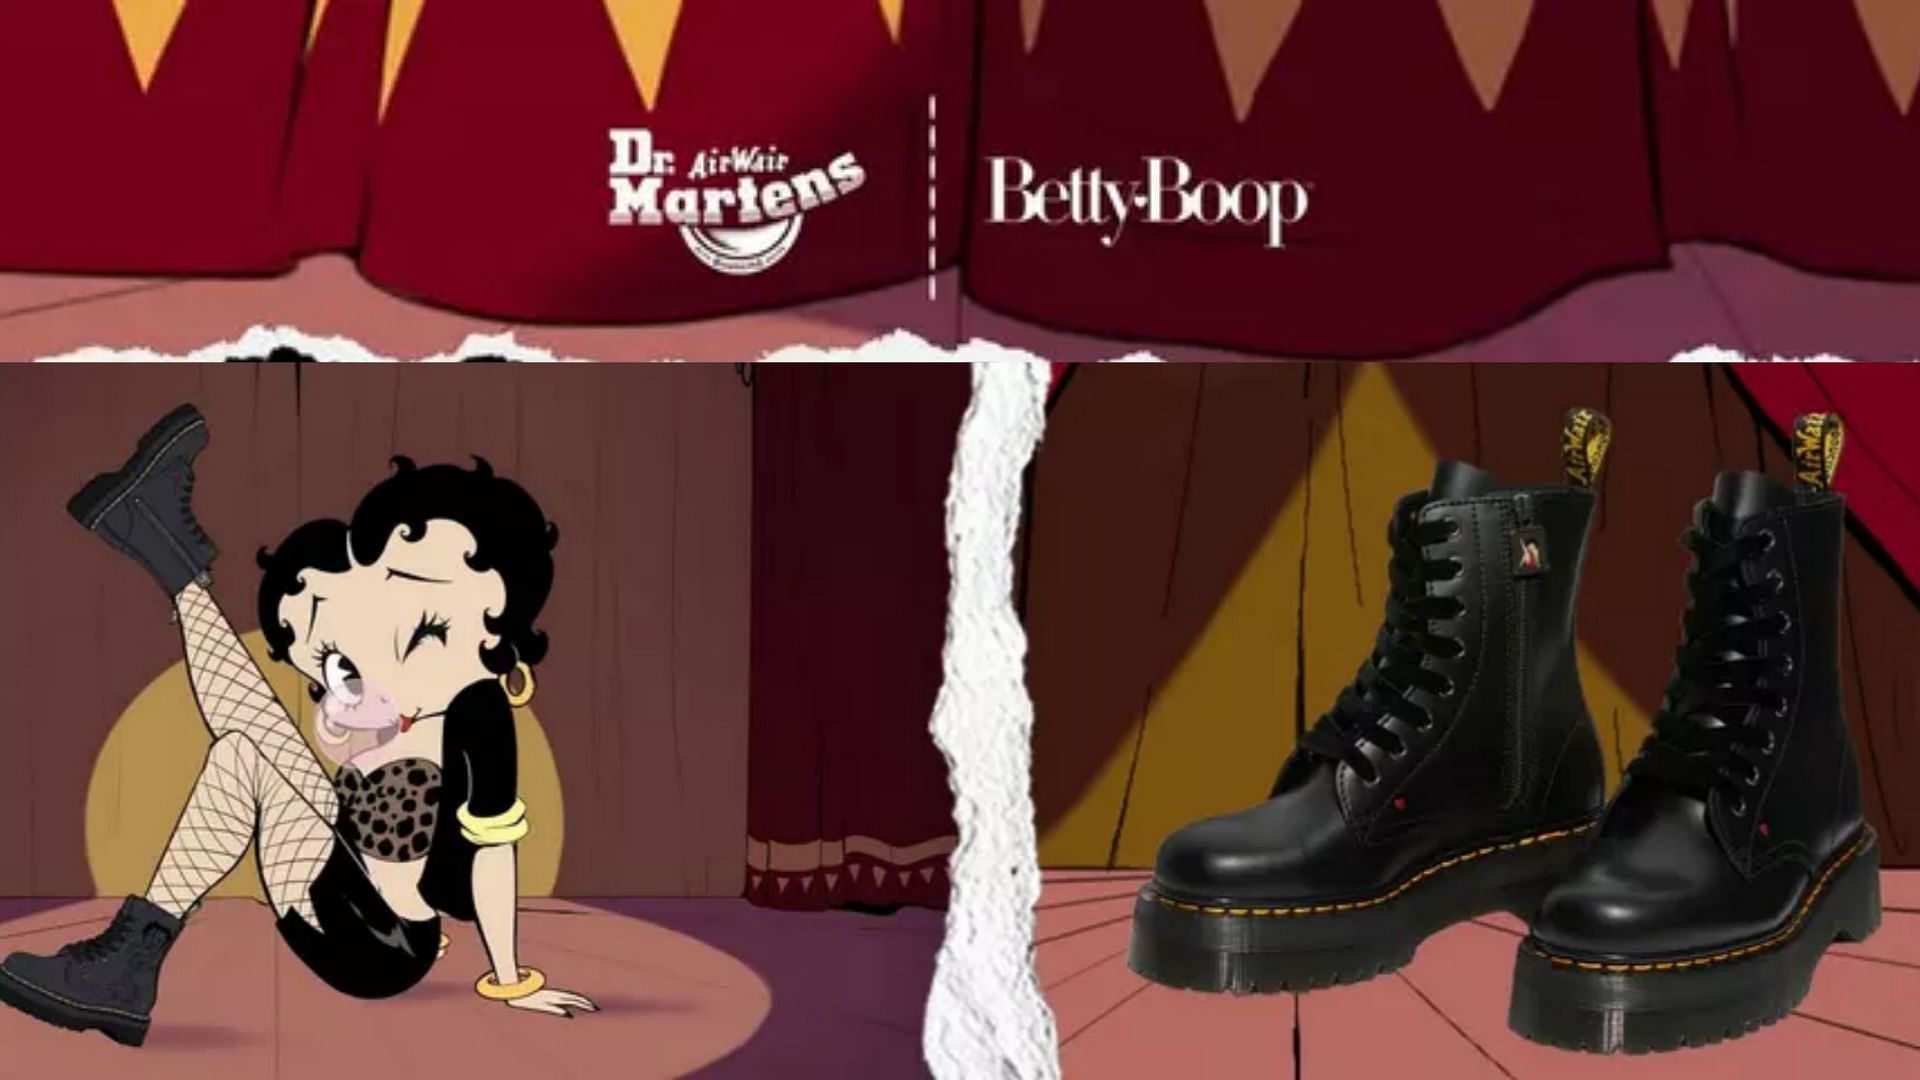 Dr. Martens x Betty Boop collection (Image via Dr. Martens)